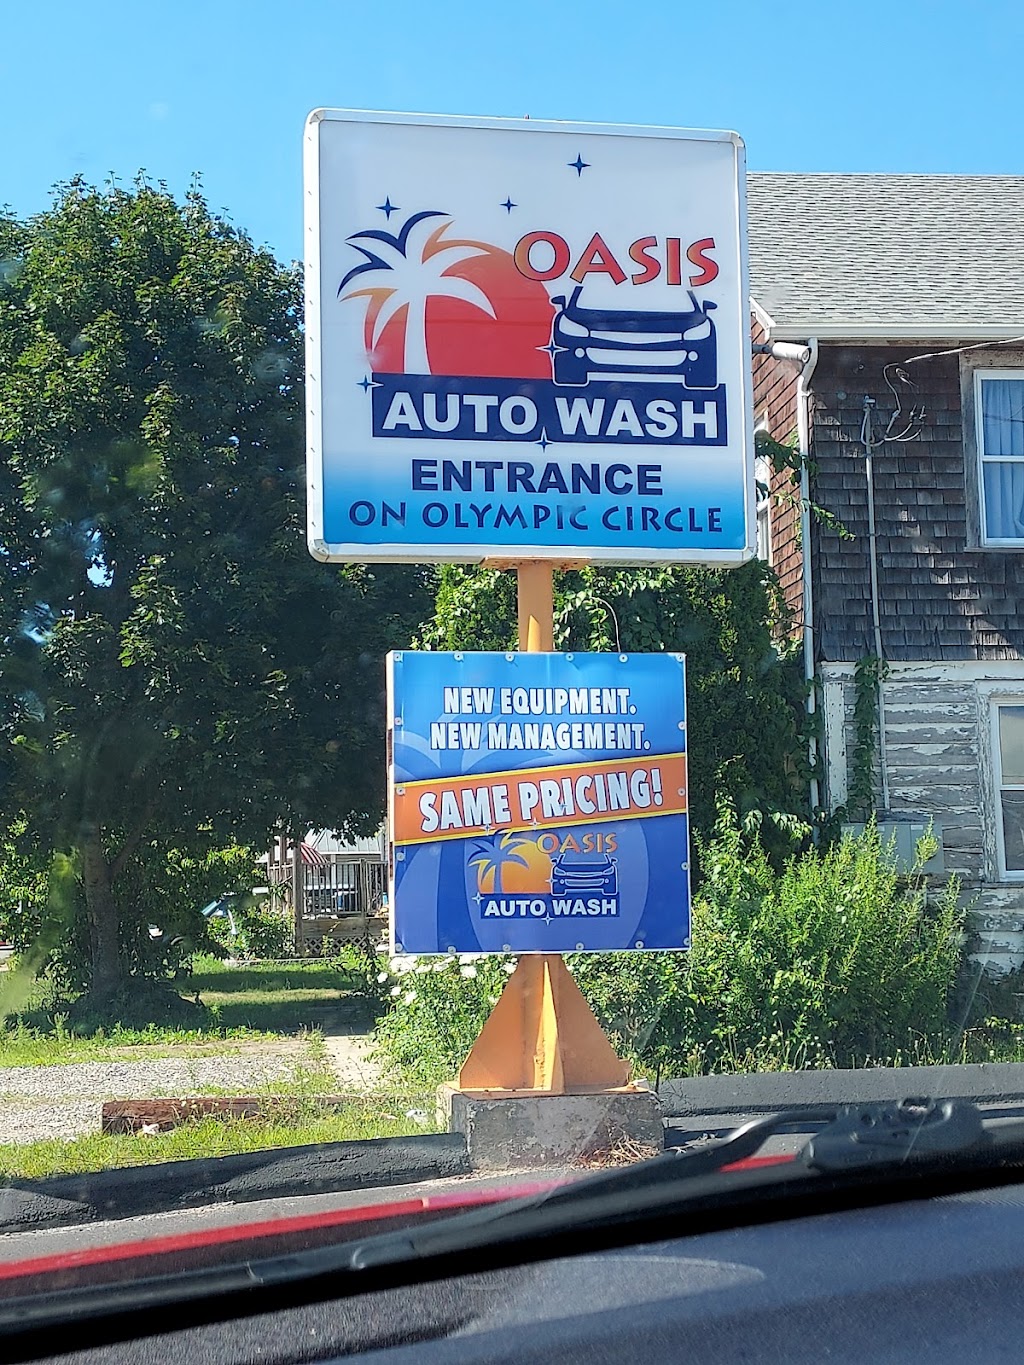 Oasis Auto Wash | 127 W Main St, Stafford Springs, CT 06076 | Phone: (413) 362-7060